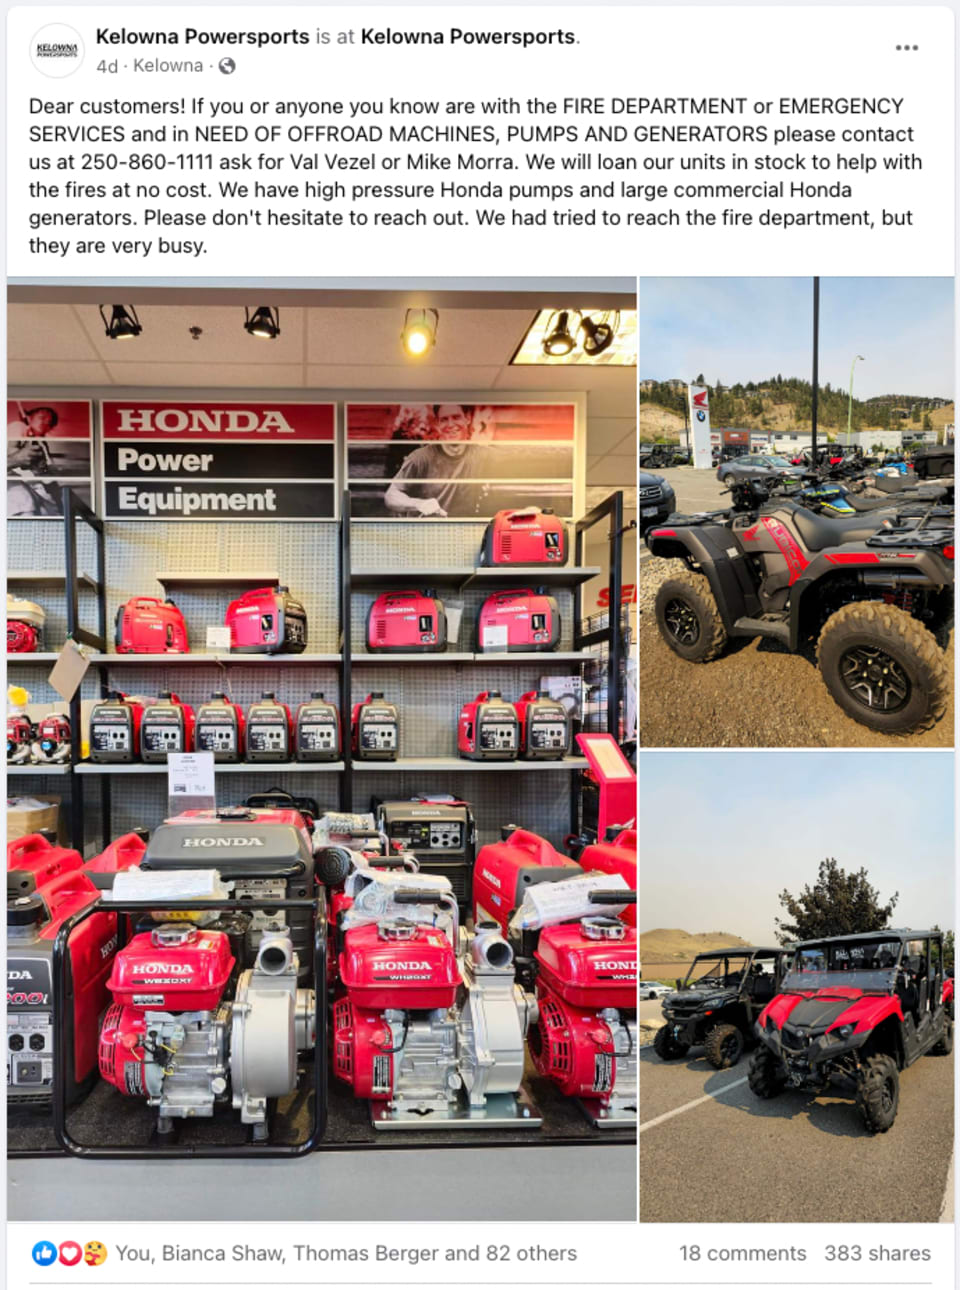 Kelowna Powersports offer to loan their equipment (at no cost) to the Fire Dept.